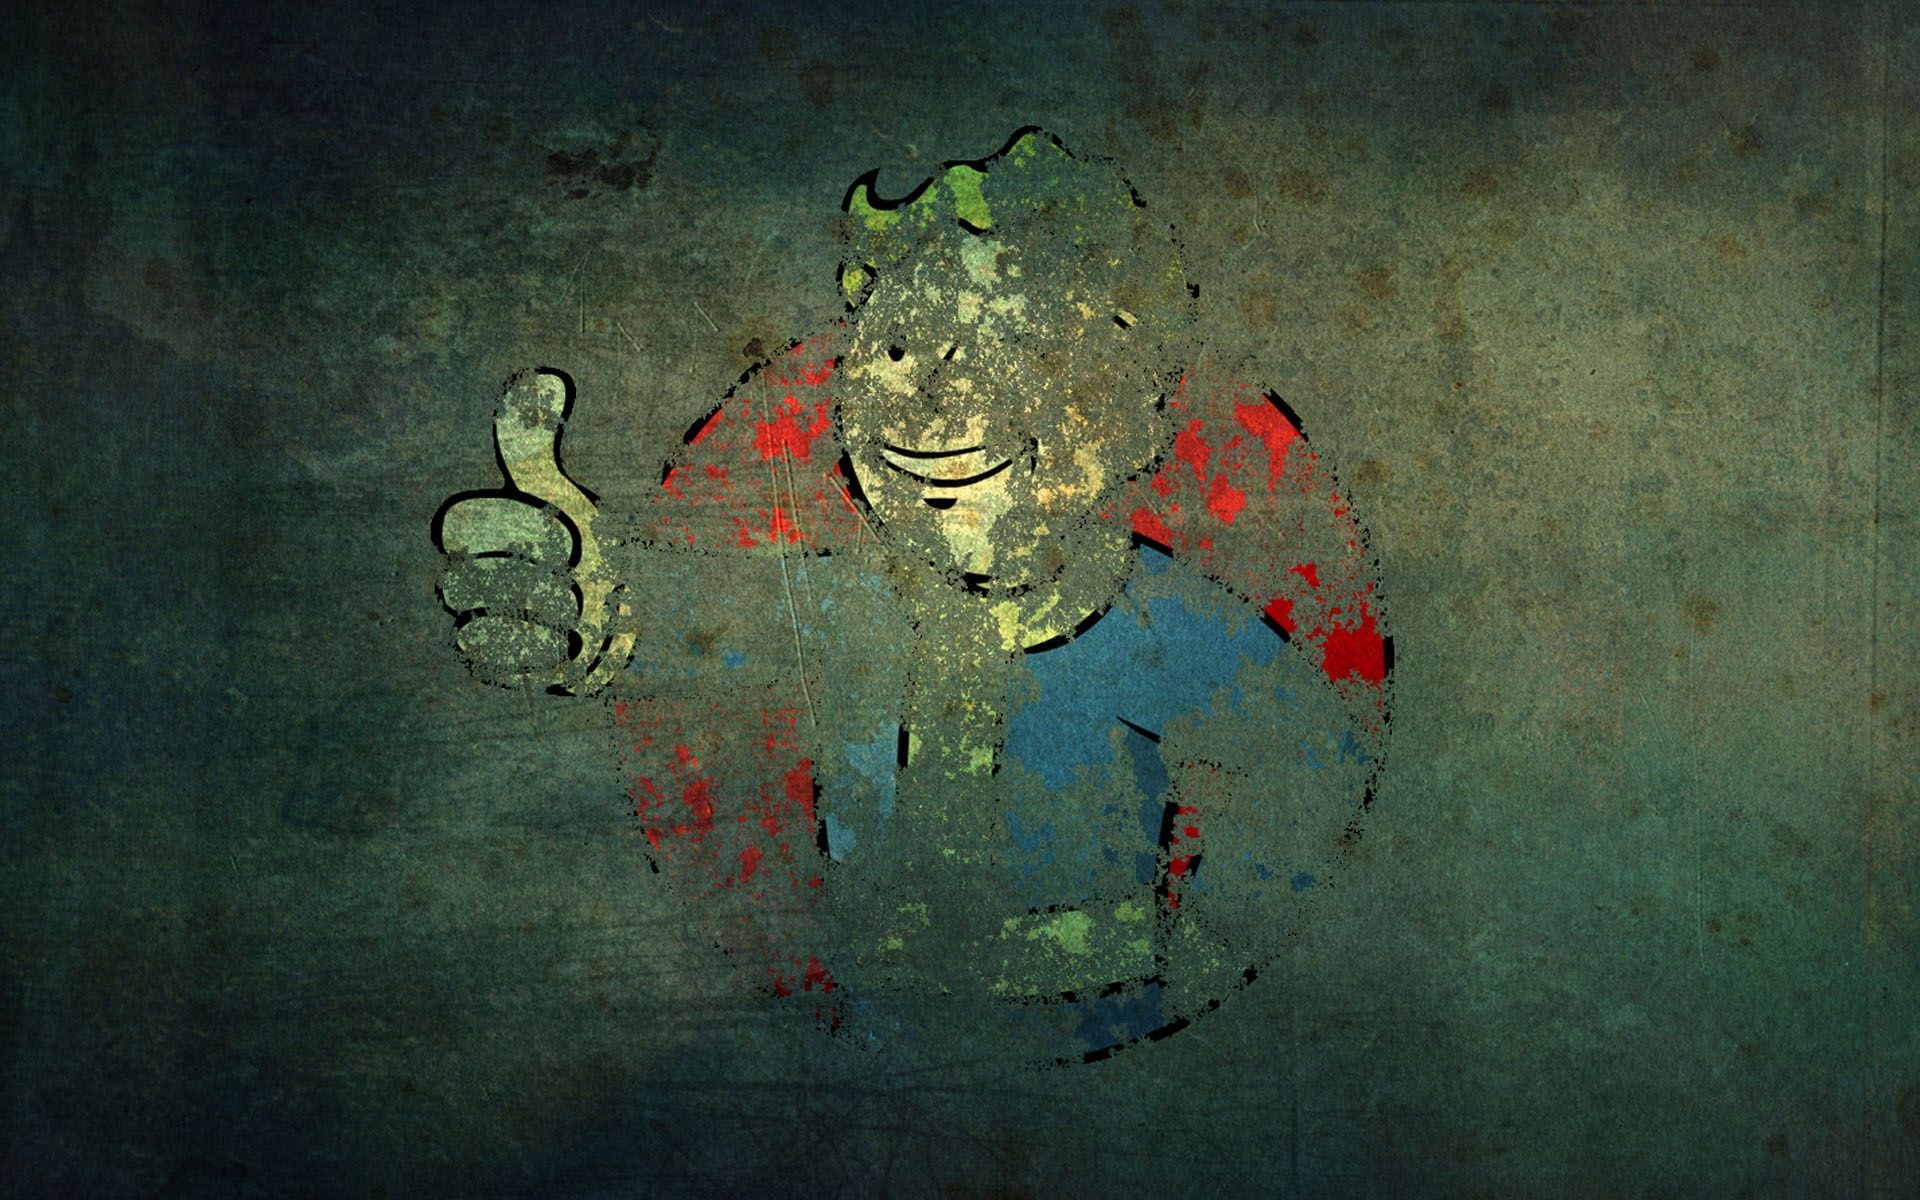 icon Fallout wallpapers and images - wallpapers, pictures, photos